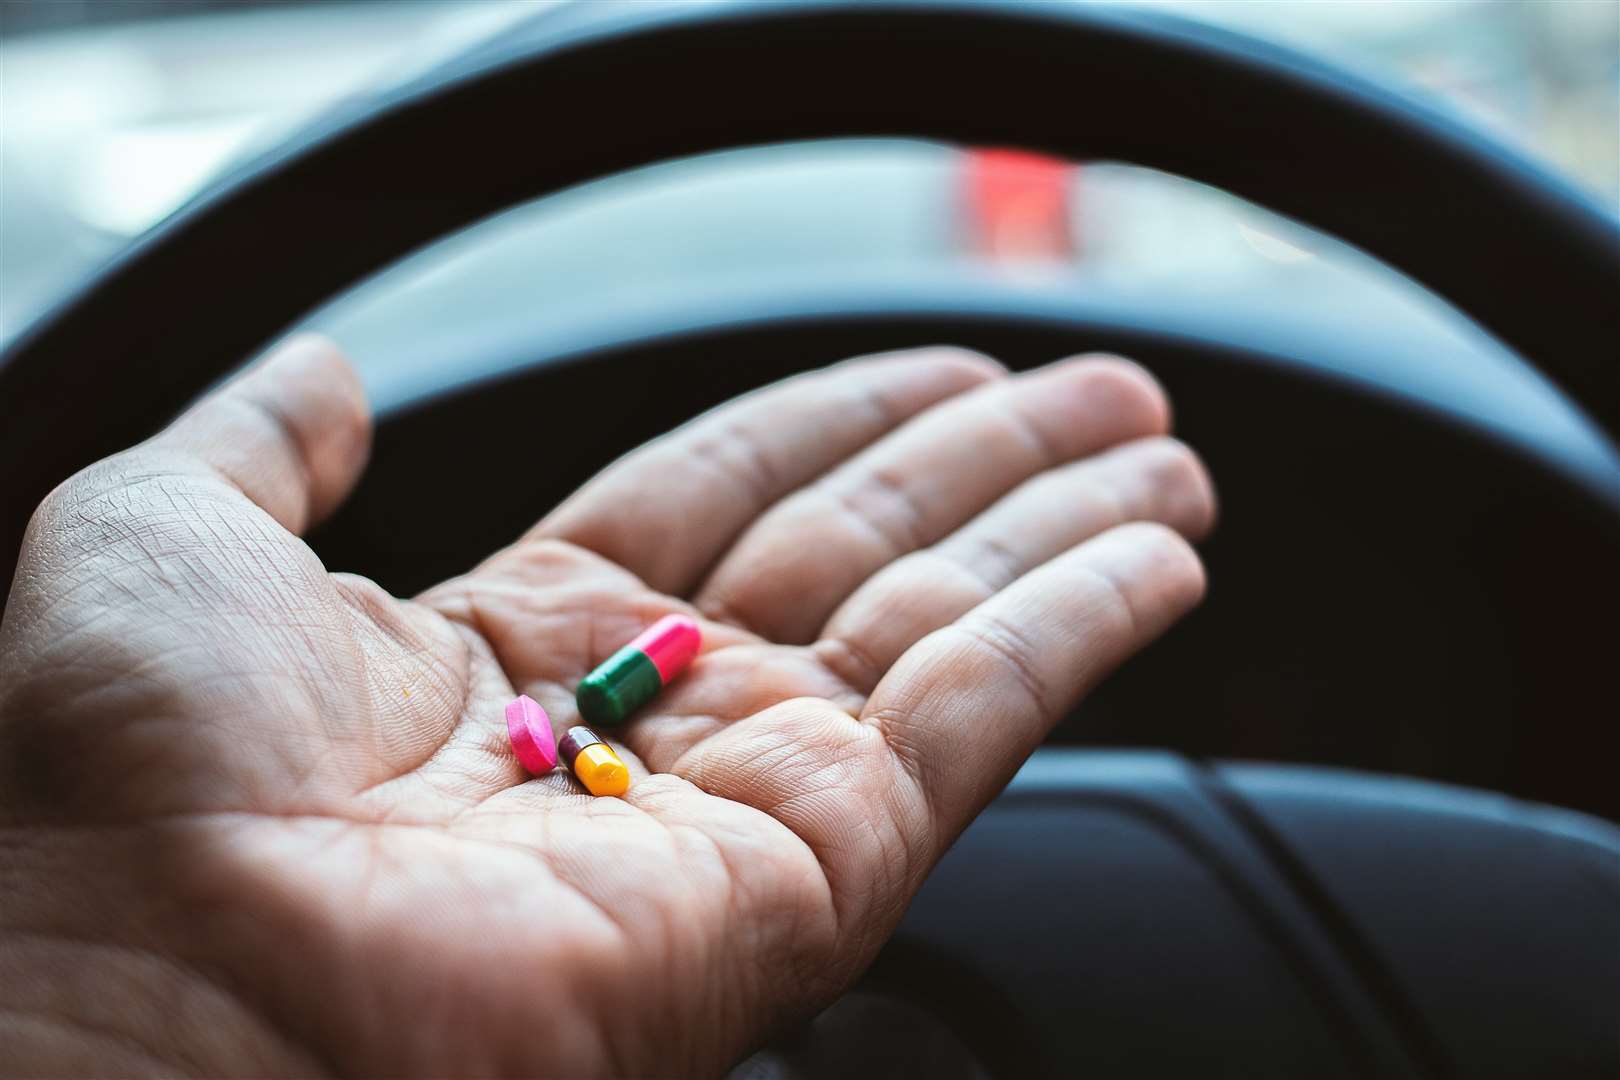 The police are cracking down on drug drivers this month.